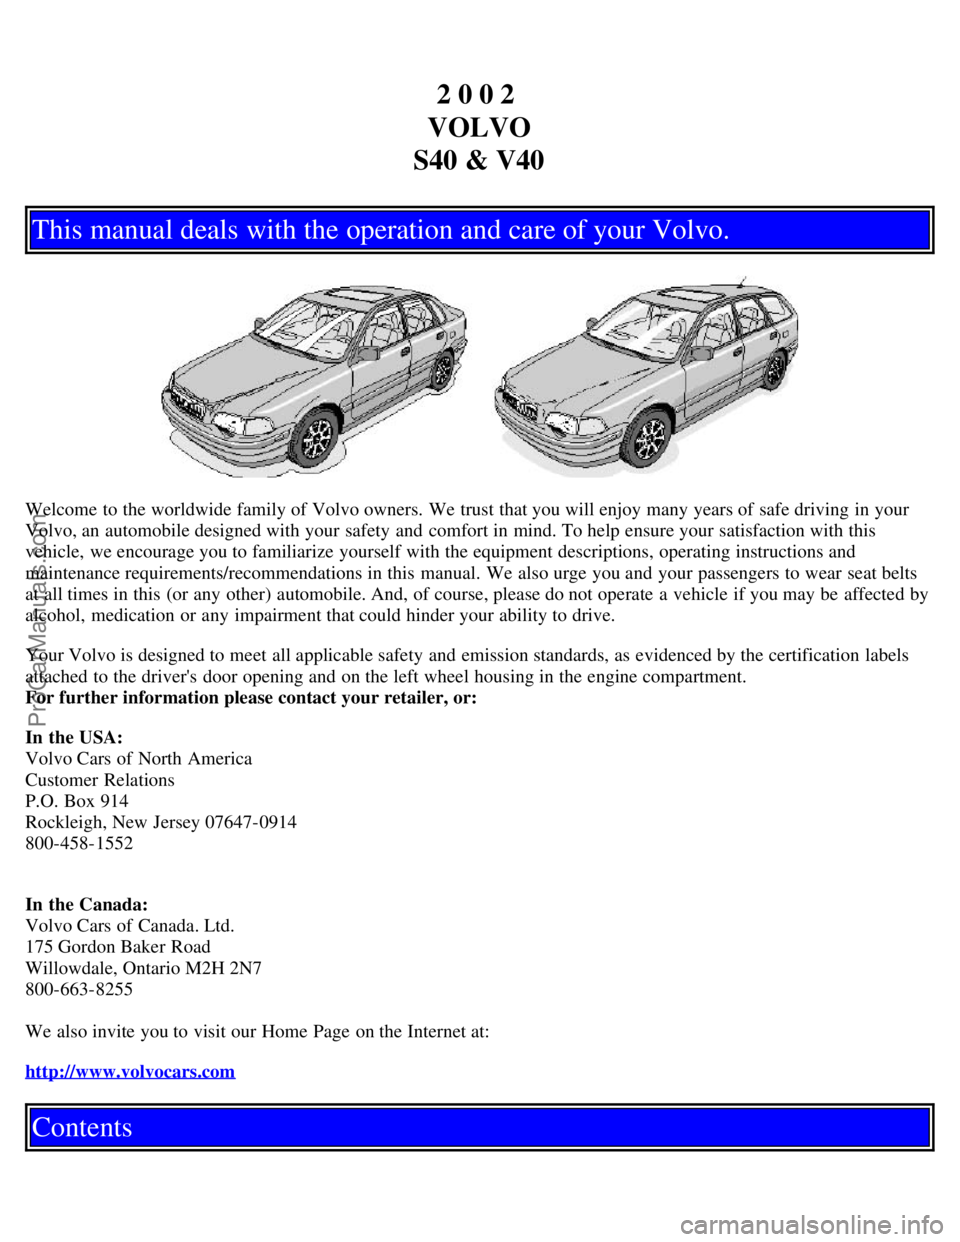 VOLVO S40 2002  Owners Manual 2 0 0 2 
VOLVO
S40 & V40
This manual deals with the operation and care of your Volvo.
Welcome to the worldwide family of Volvo owners. We trust that you will enjoy many years of safe driving in your
V